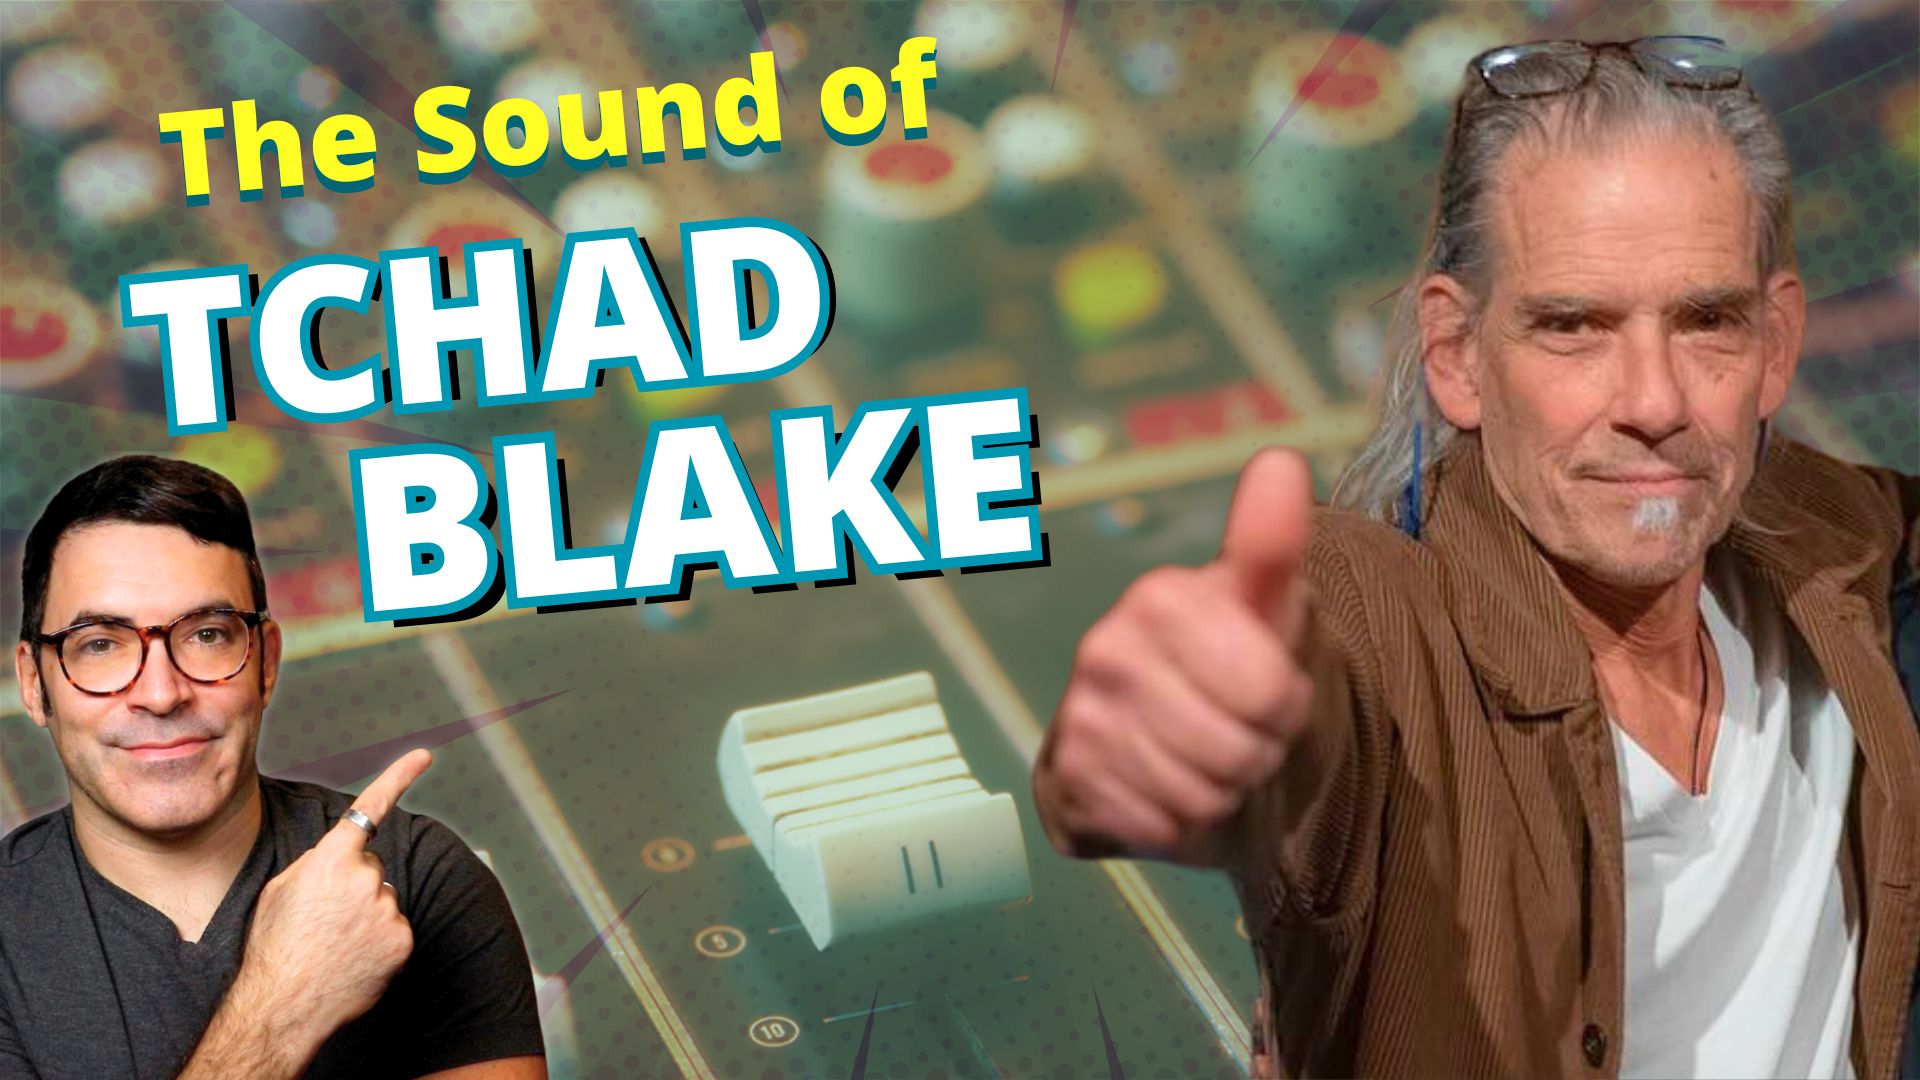 Mix Masters: The Secrets of Tchad Blake’s Sound [Analog Tones with Digital Tools]